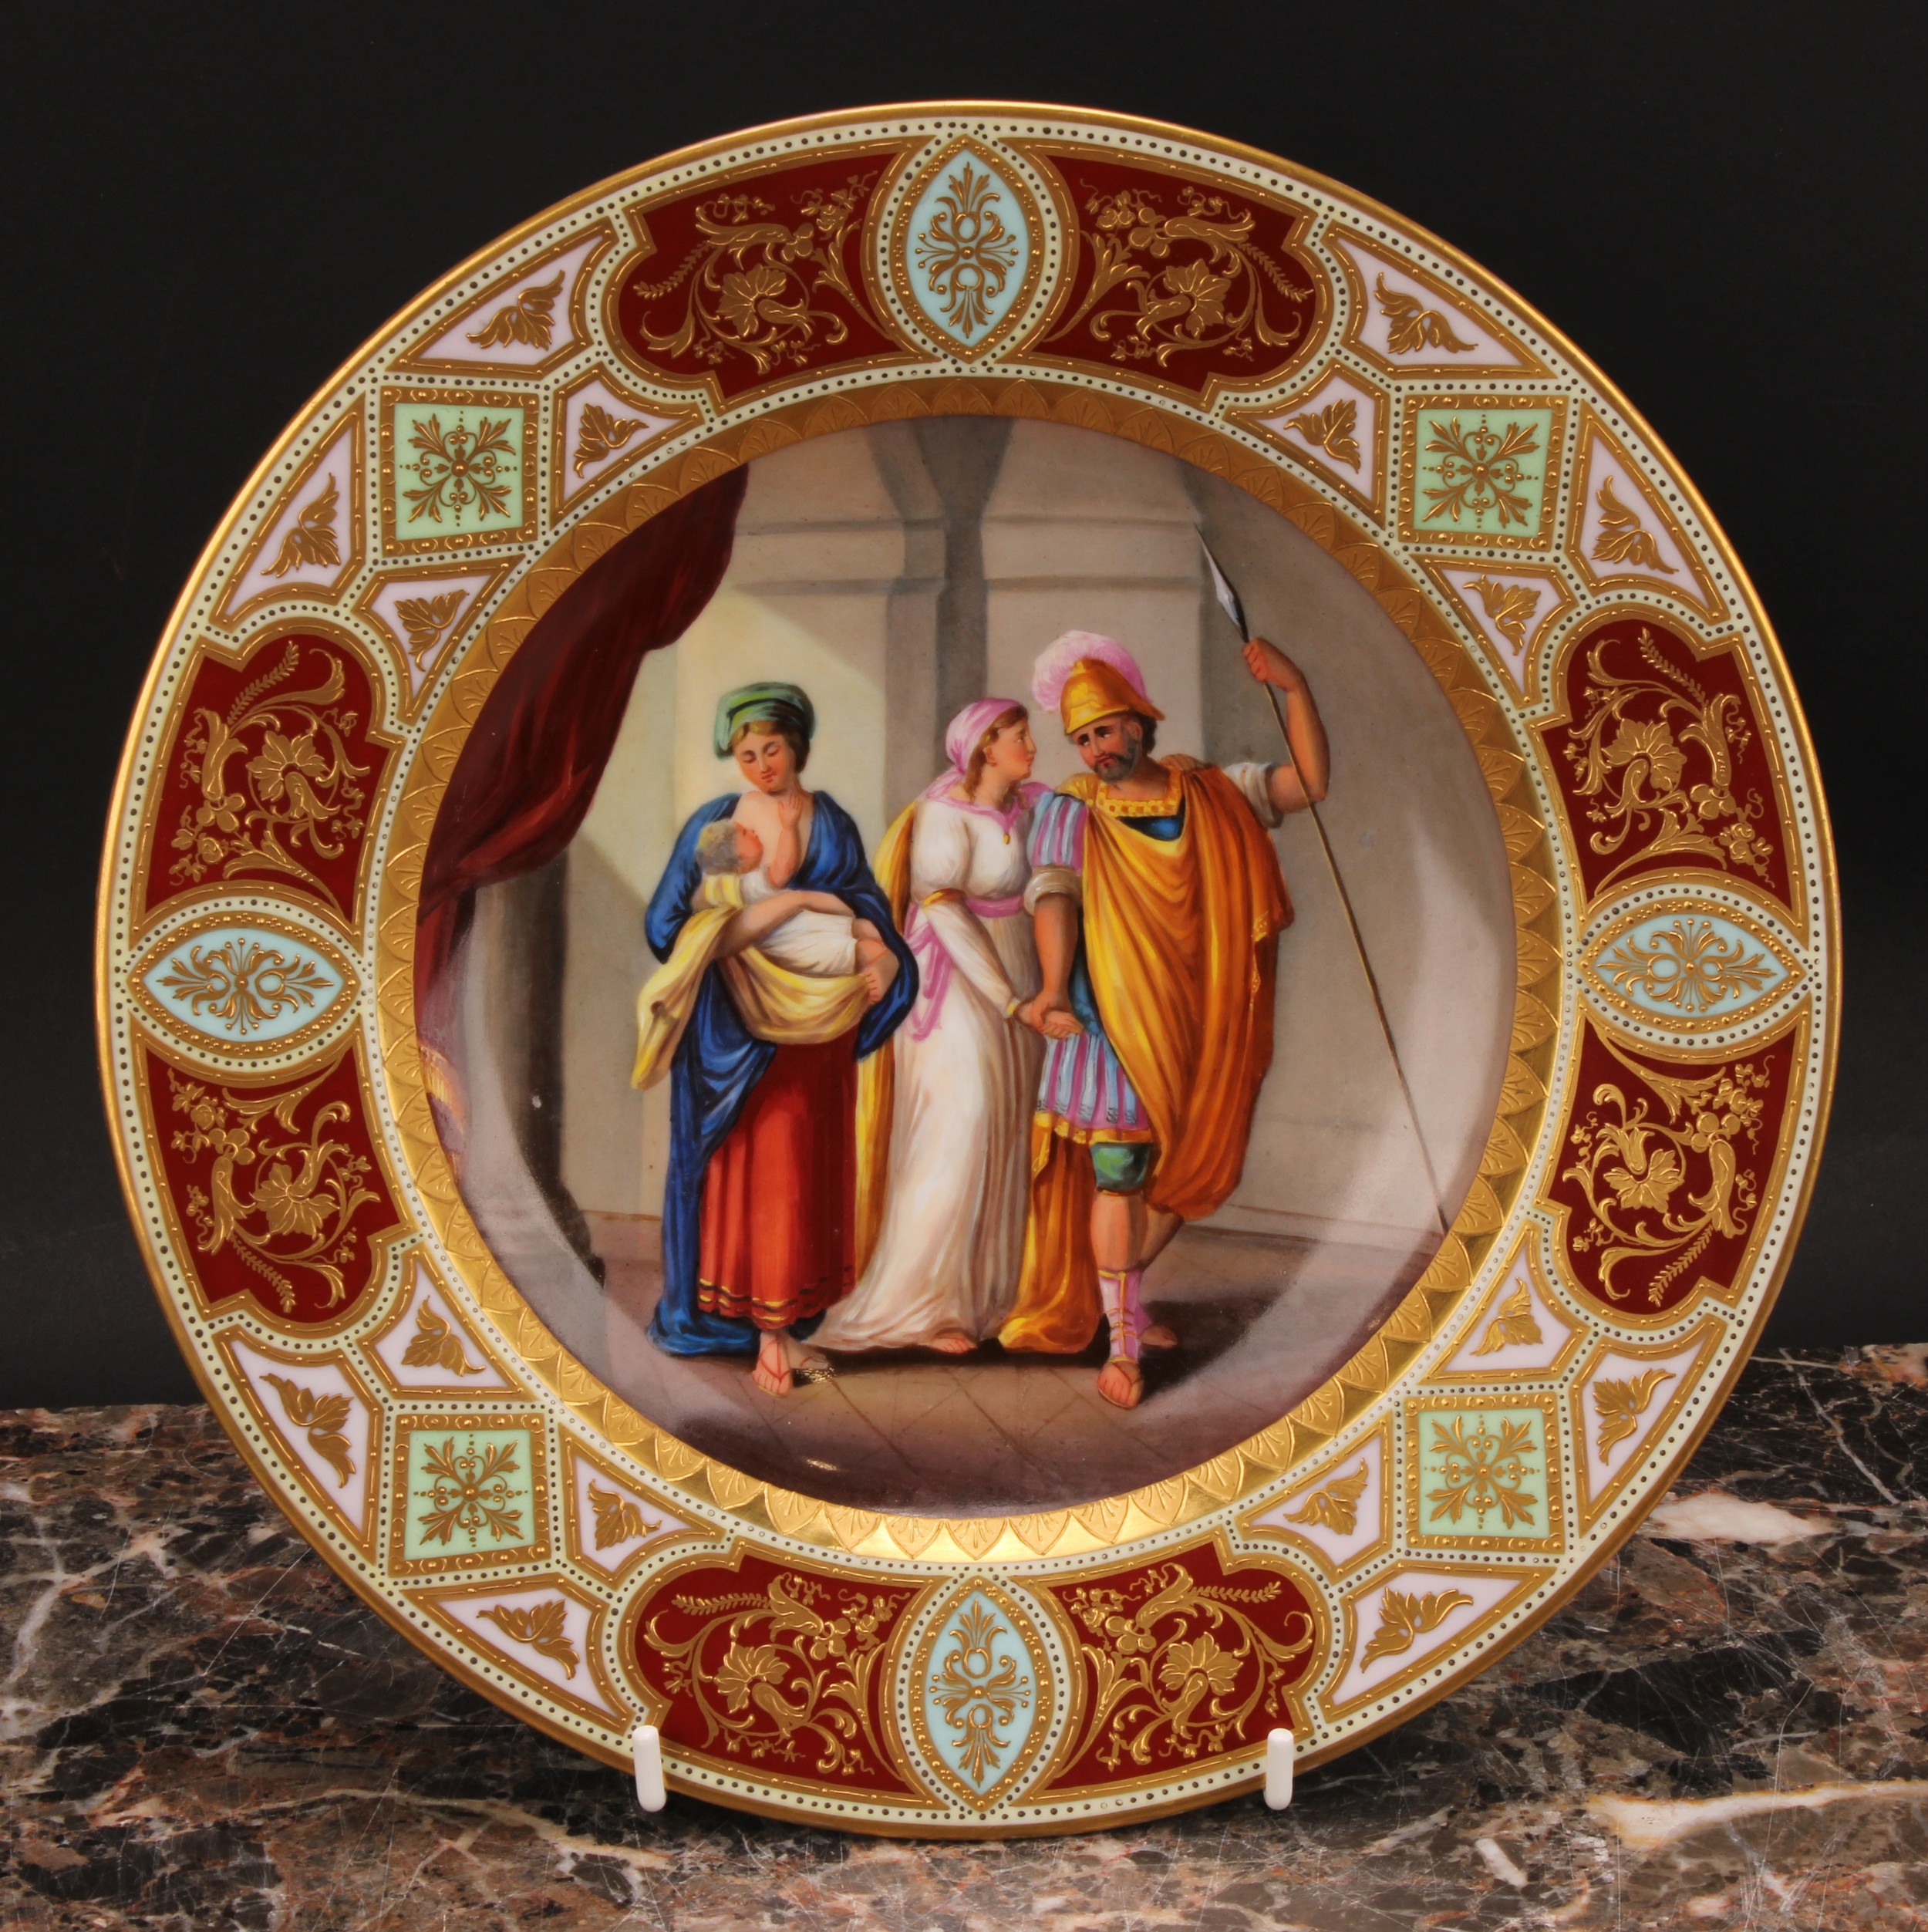 A Vienna dish, painted with Hector's Abscheid [farewell], from Homer's Iliad, 24.5ccm diam, blue - Image 2 of 4